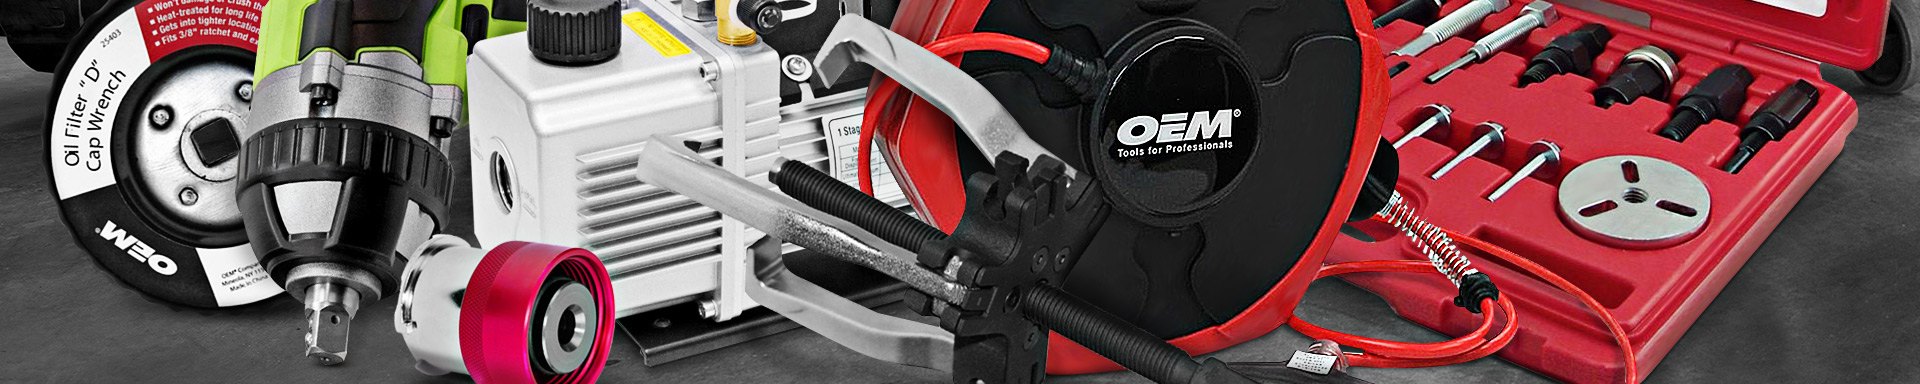 OEMTOOLS™ 24415 1/4 Inch Drive Super Duty Air Impact Ratchet 